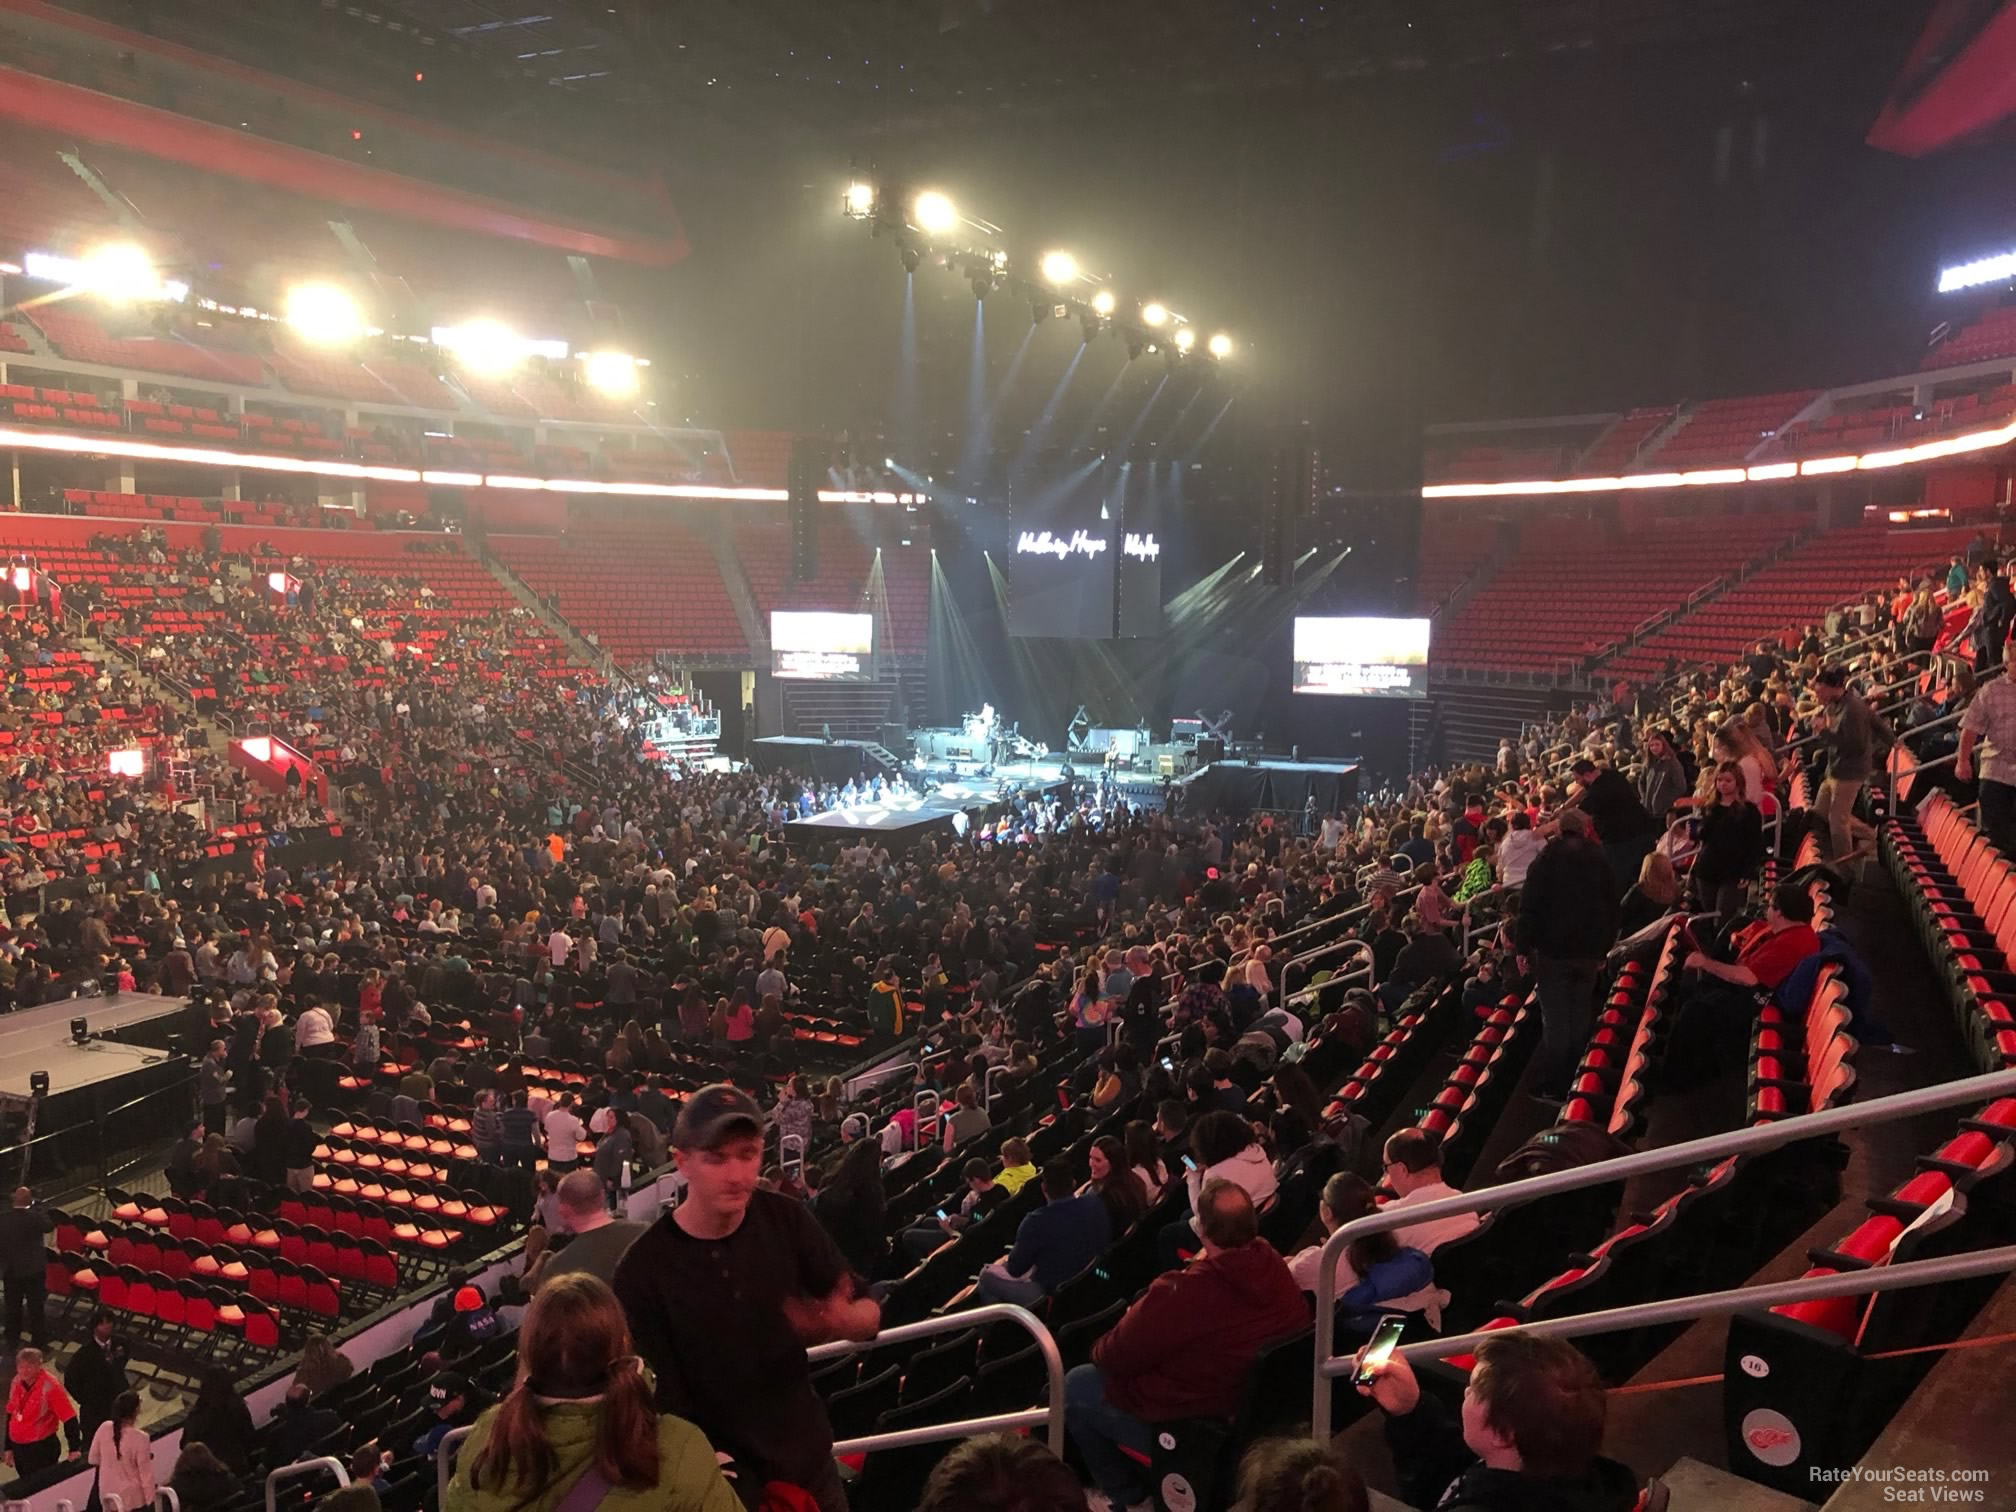 section 113, row 18 seat view  for concert - little caesars arena